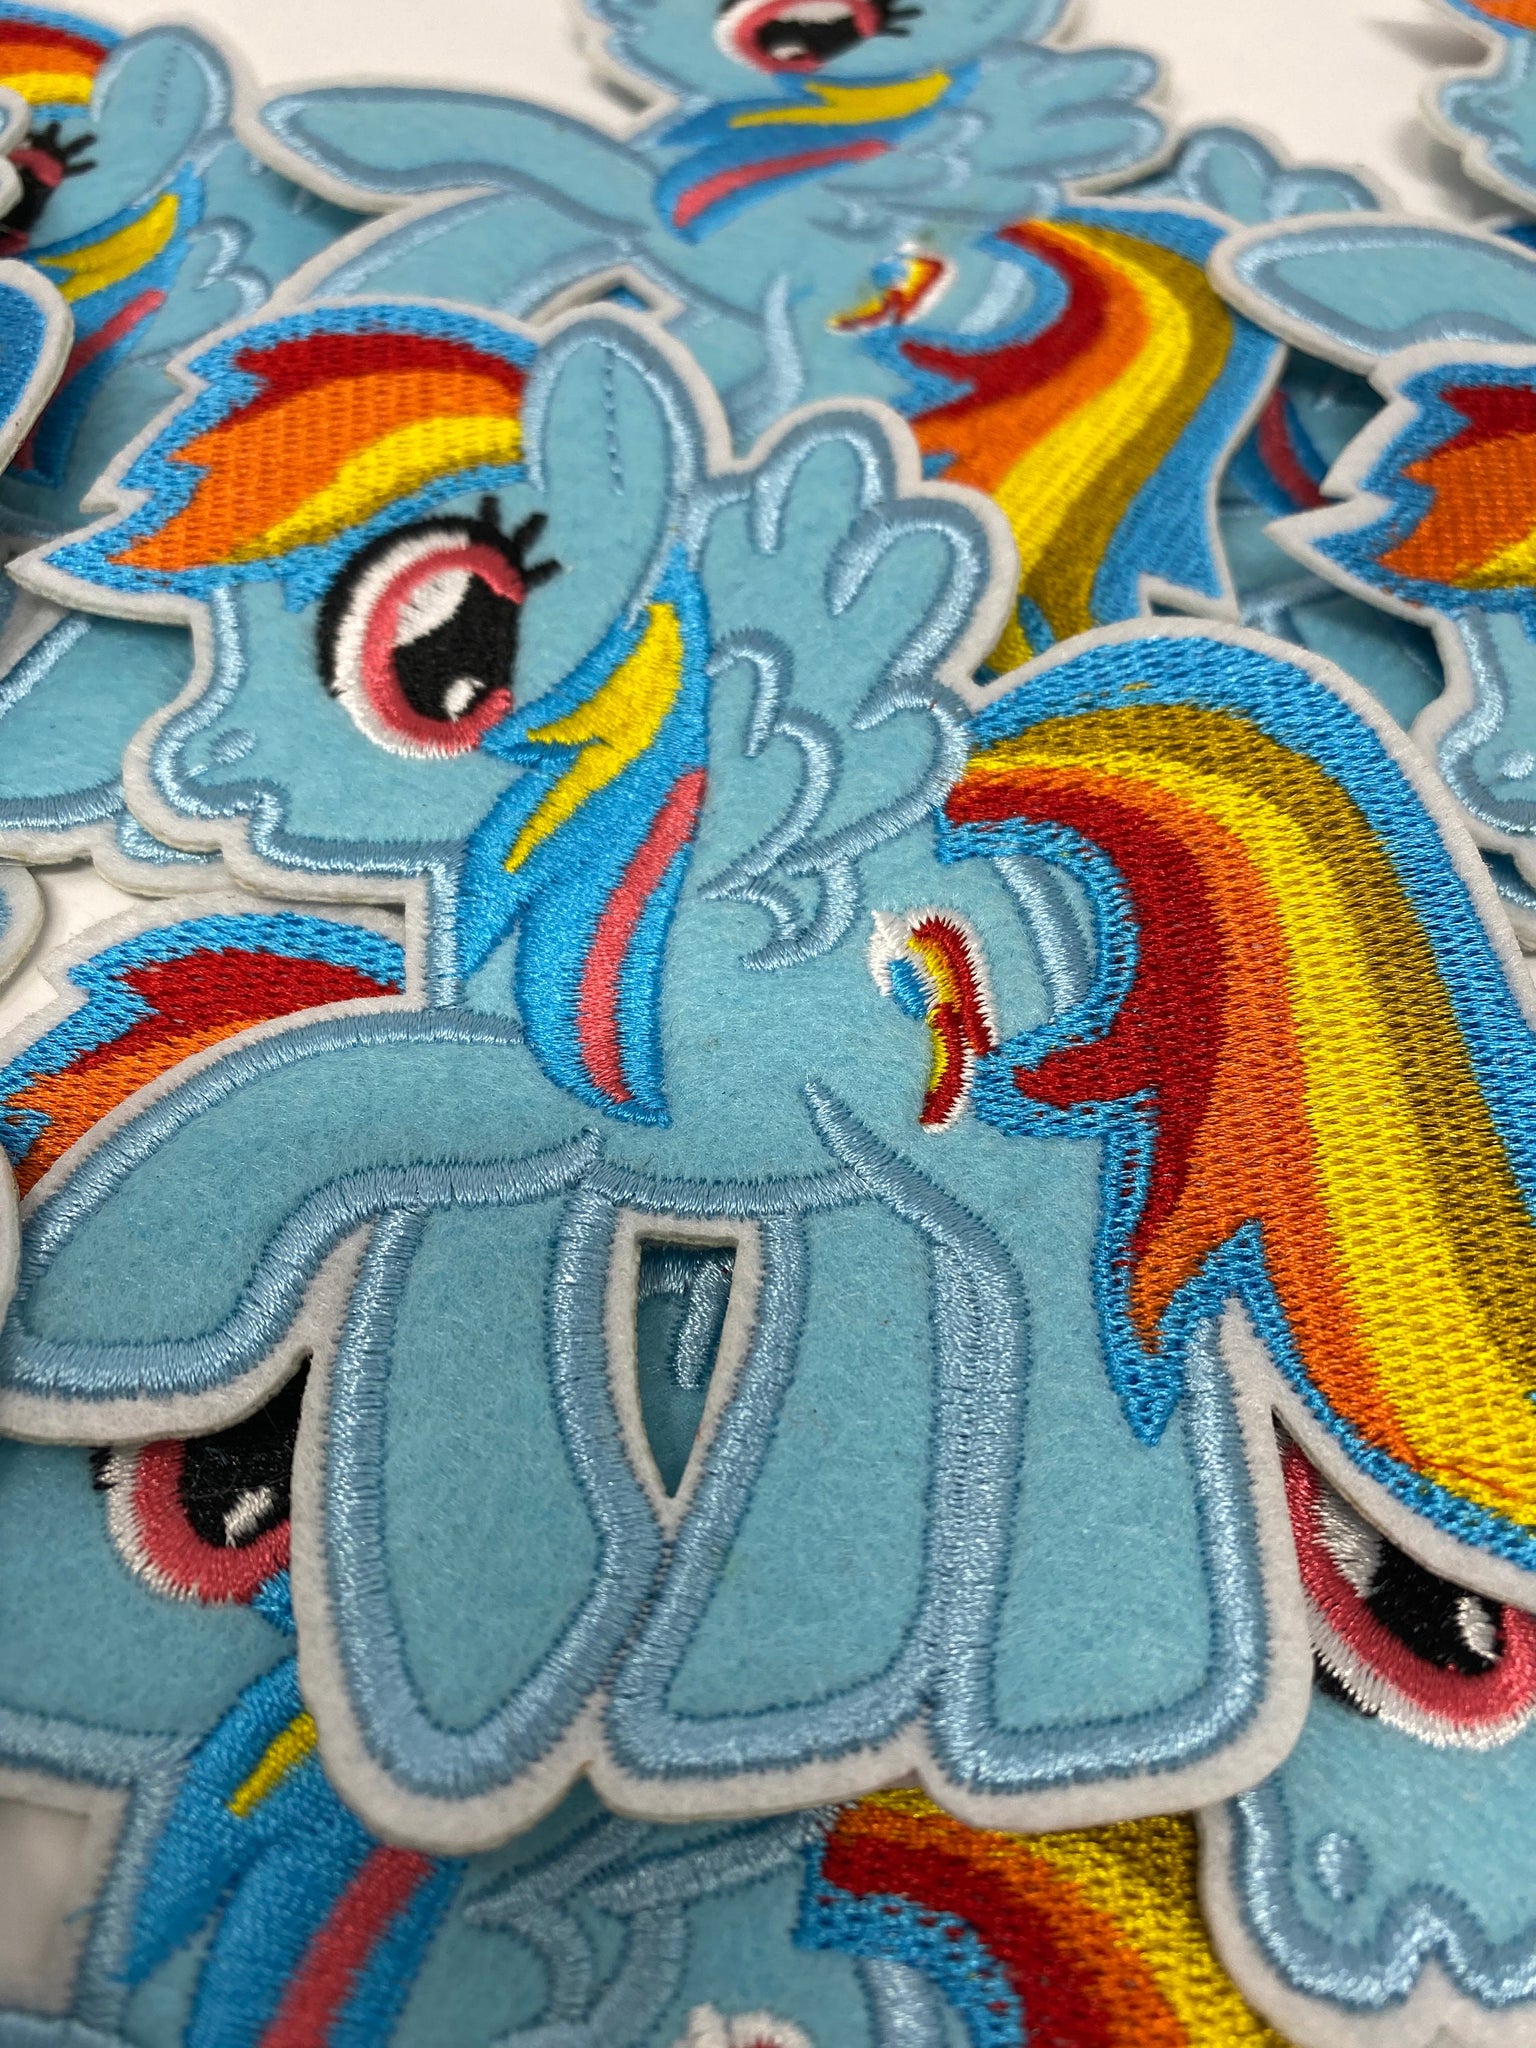 NEW, Exclusive Patch "Rainbow Blue  Pony" Iron-on Embroidered 3D Patch, Size 3.5''